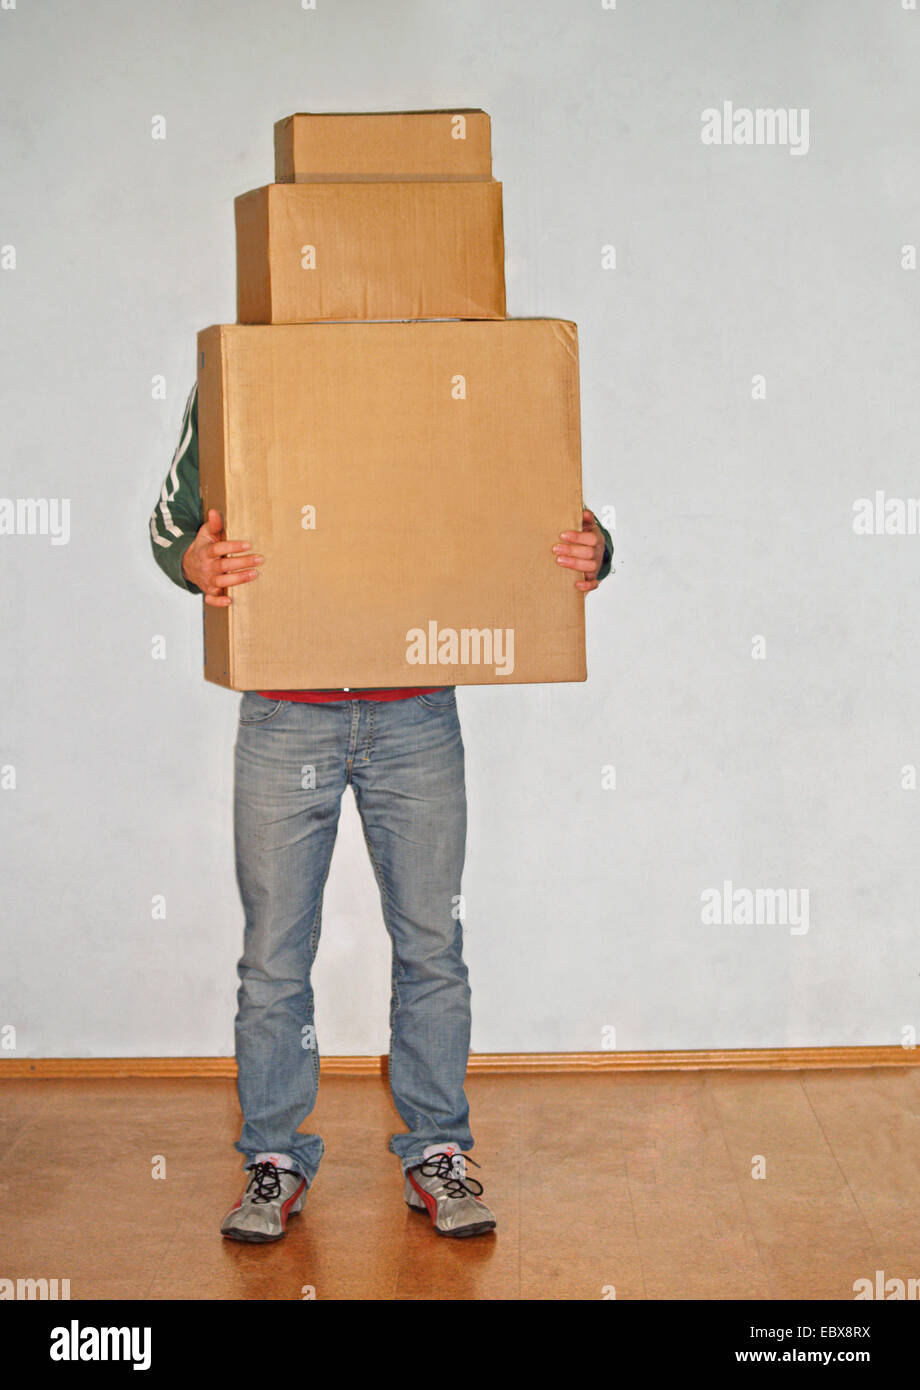 man carrying packing cases Stock Photo